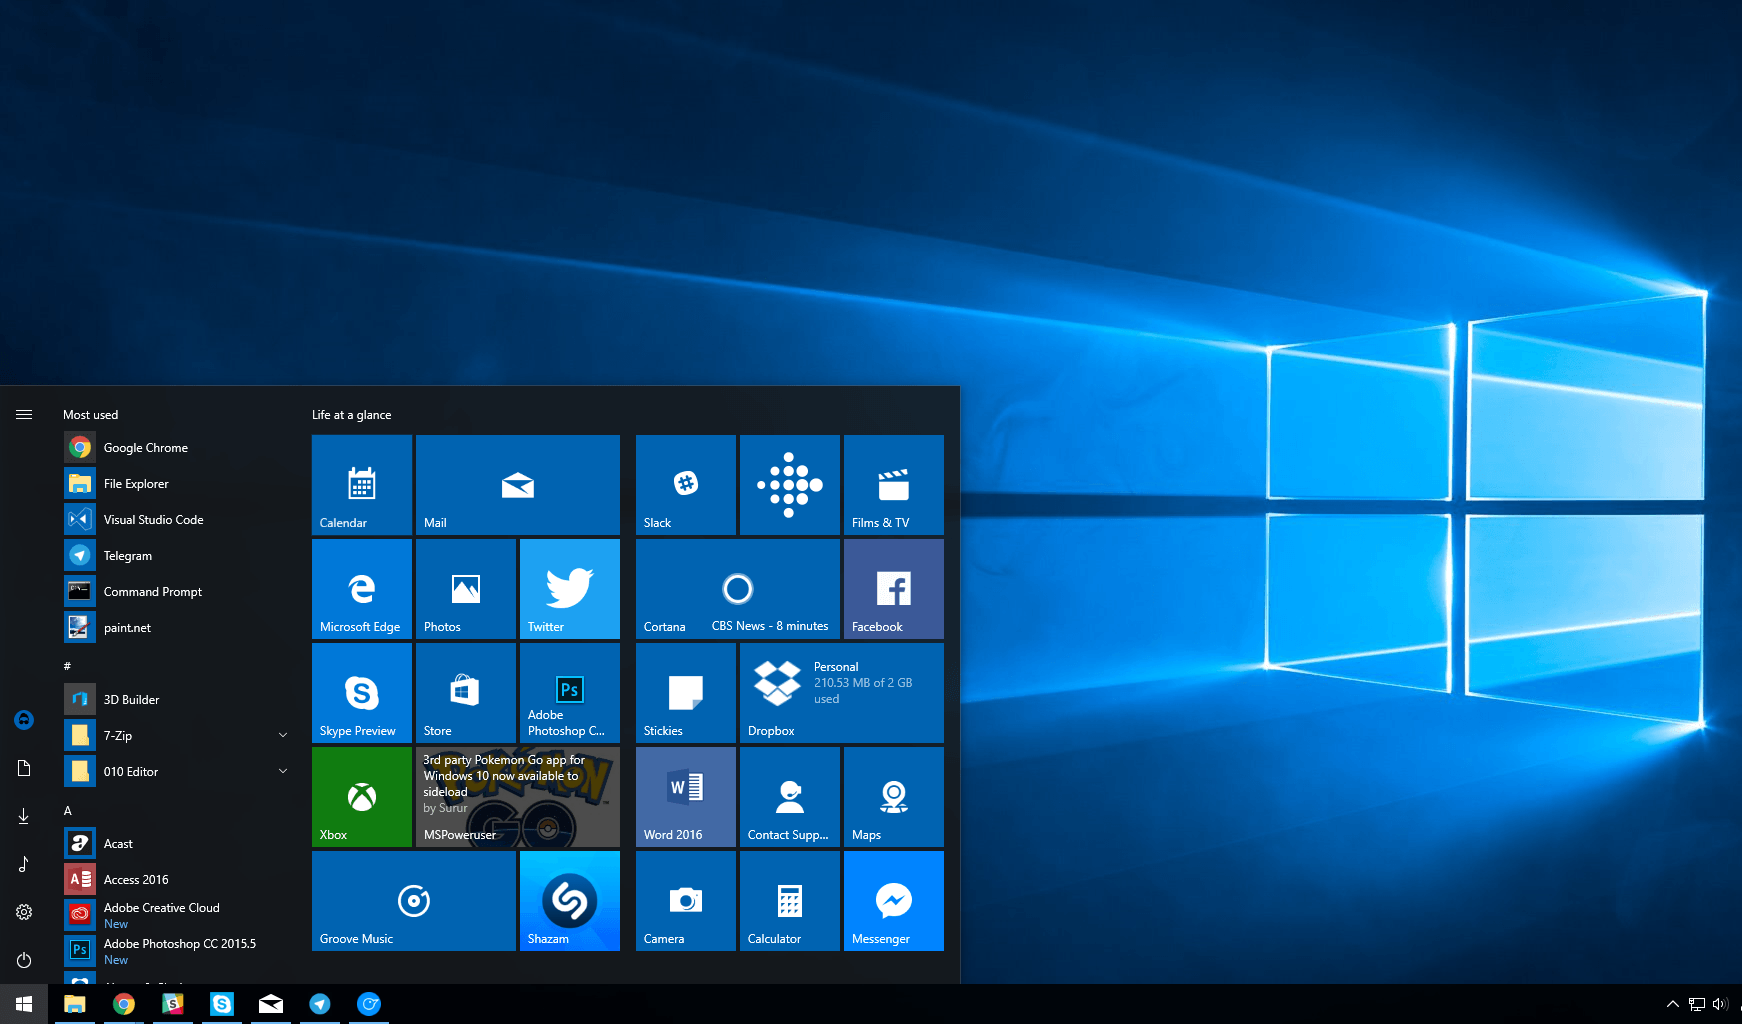 Windows 10 Insider builds to improve the Share functionality